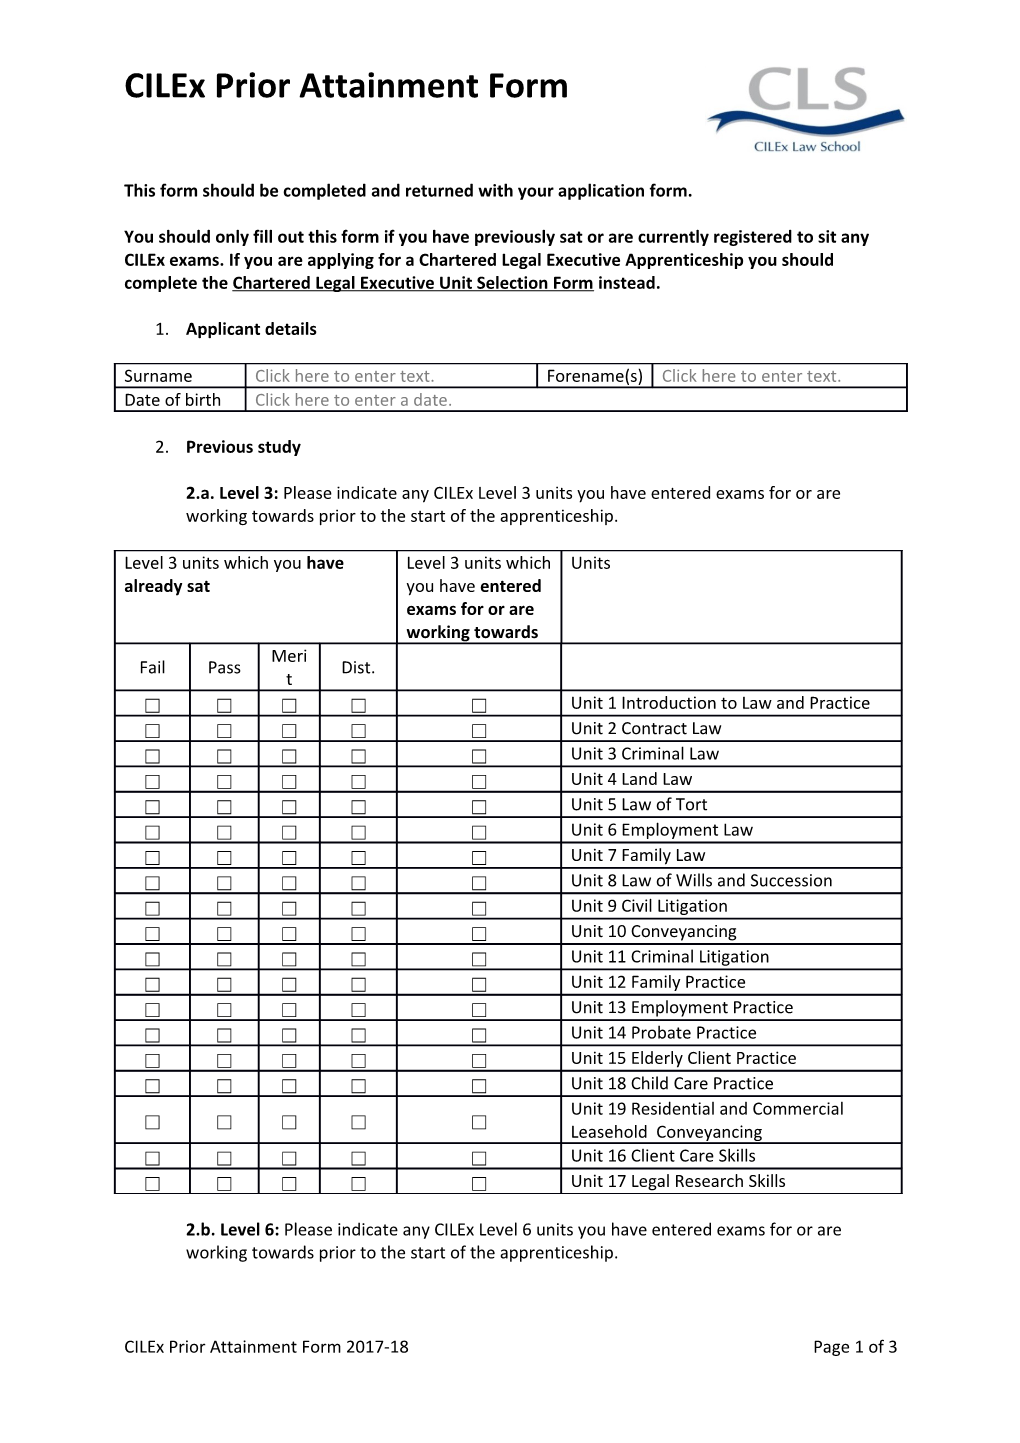 This Form Should Be Completed and Returned with Your Application Form